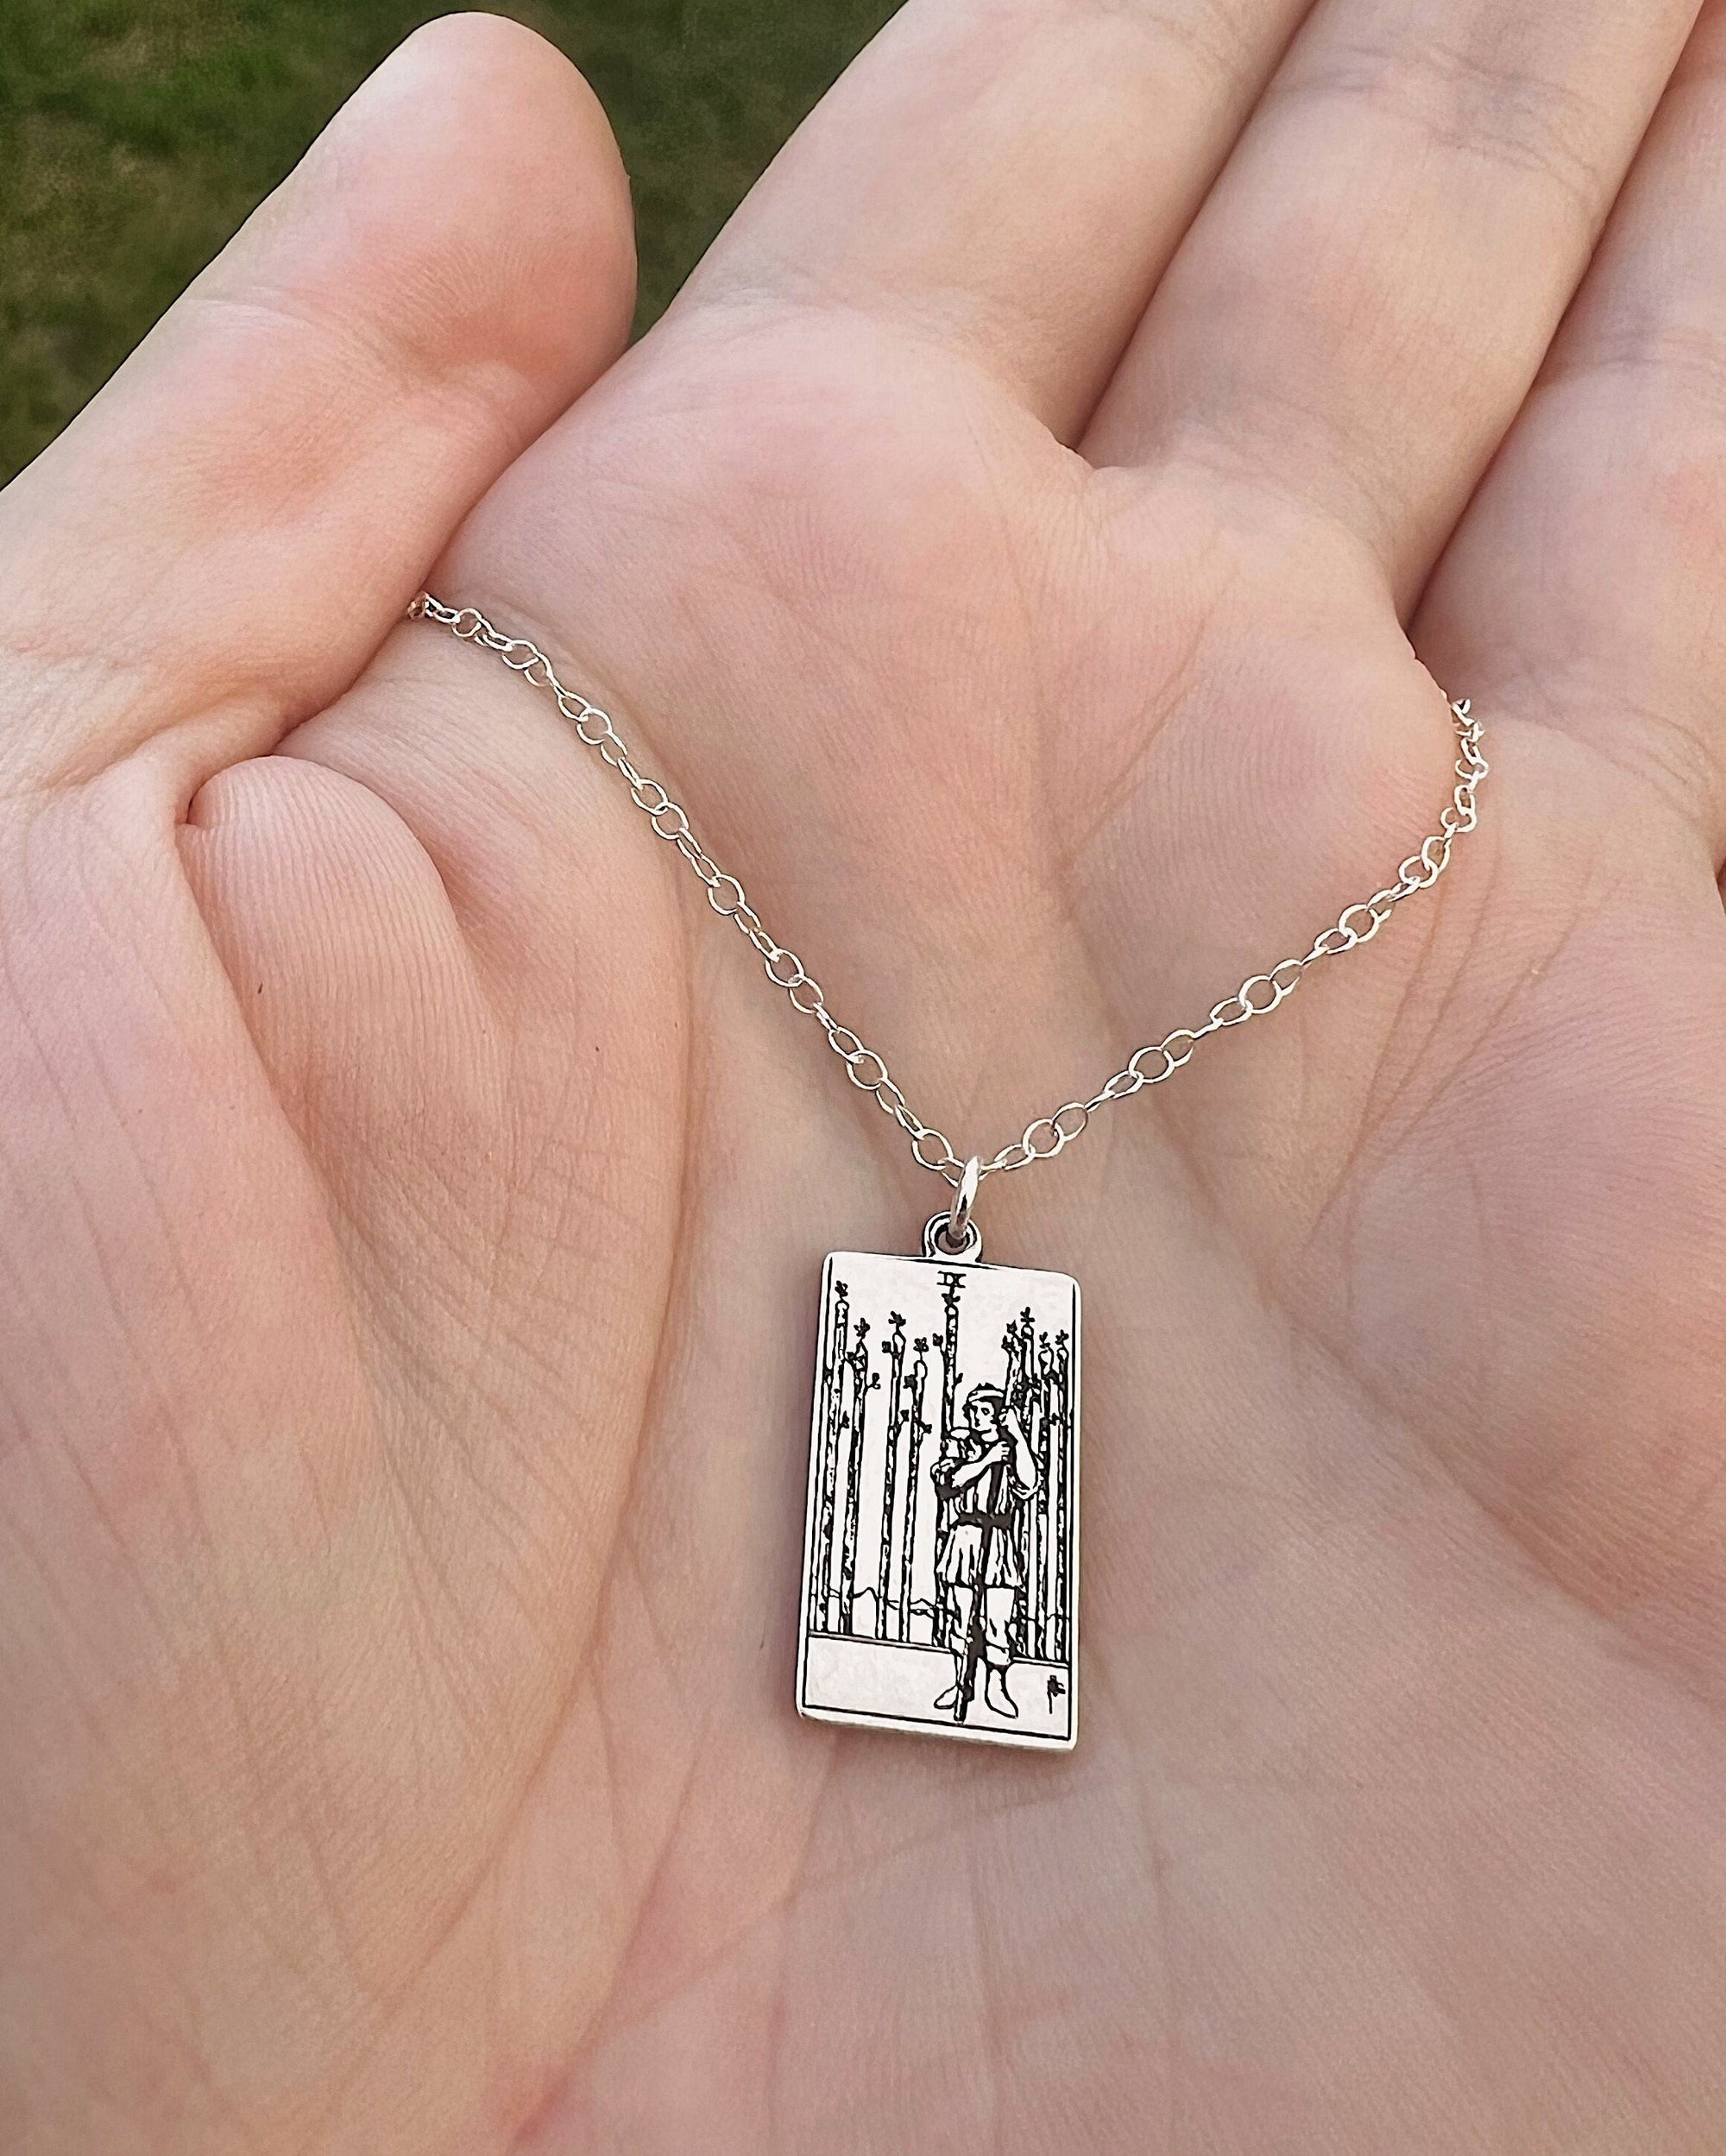 Nine of Wands Tarot Card Necklace - Sterling Silver